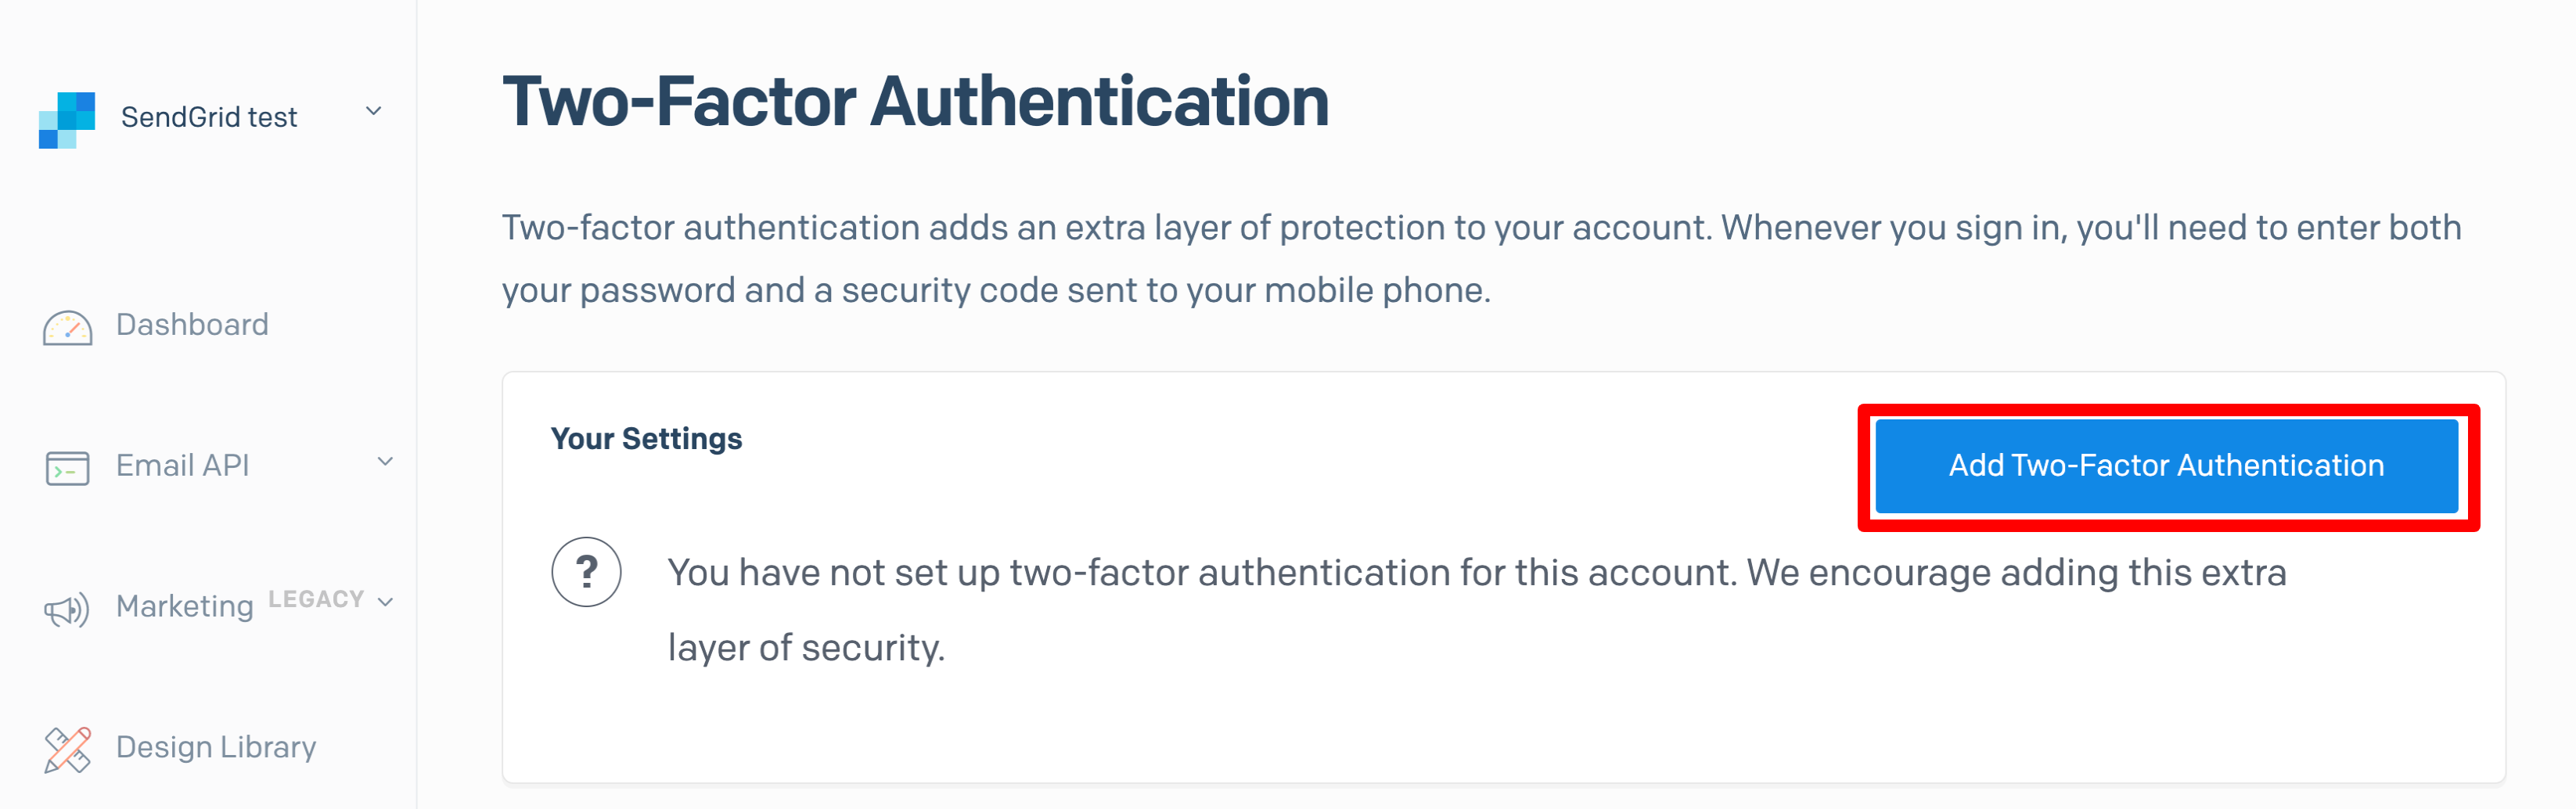 「Settings > Two-Factor Authentication」を選択